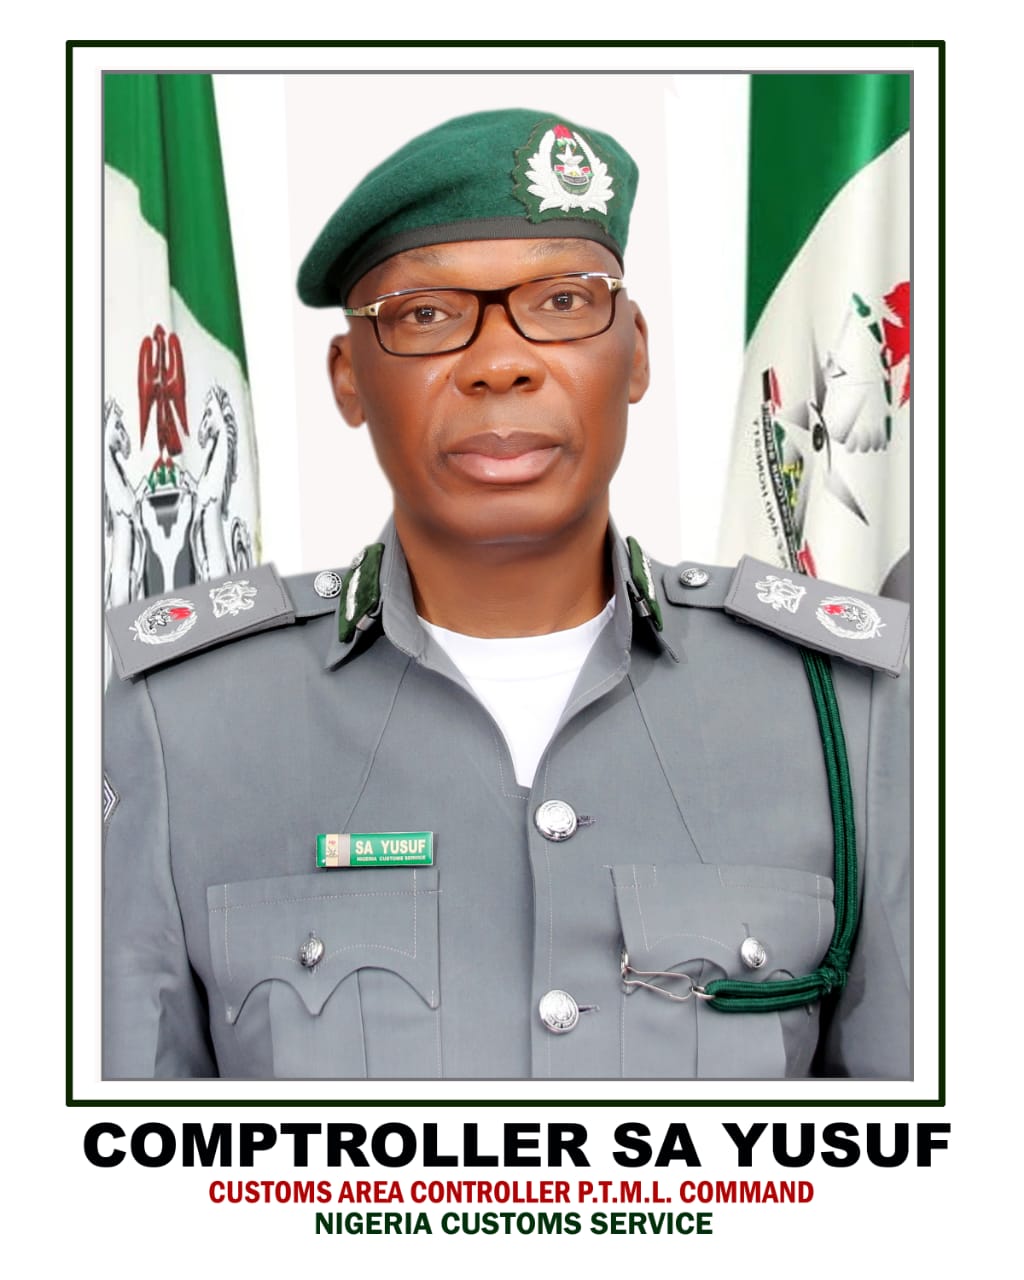 PTML Command Achieves 3 Hour Feat for Vehicle Clearance, Collects Over N100b in 6 Months